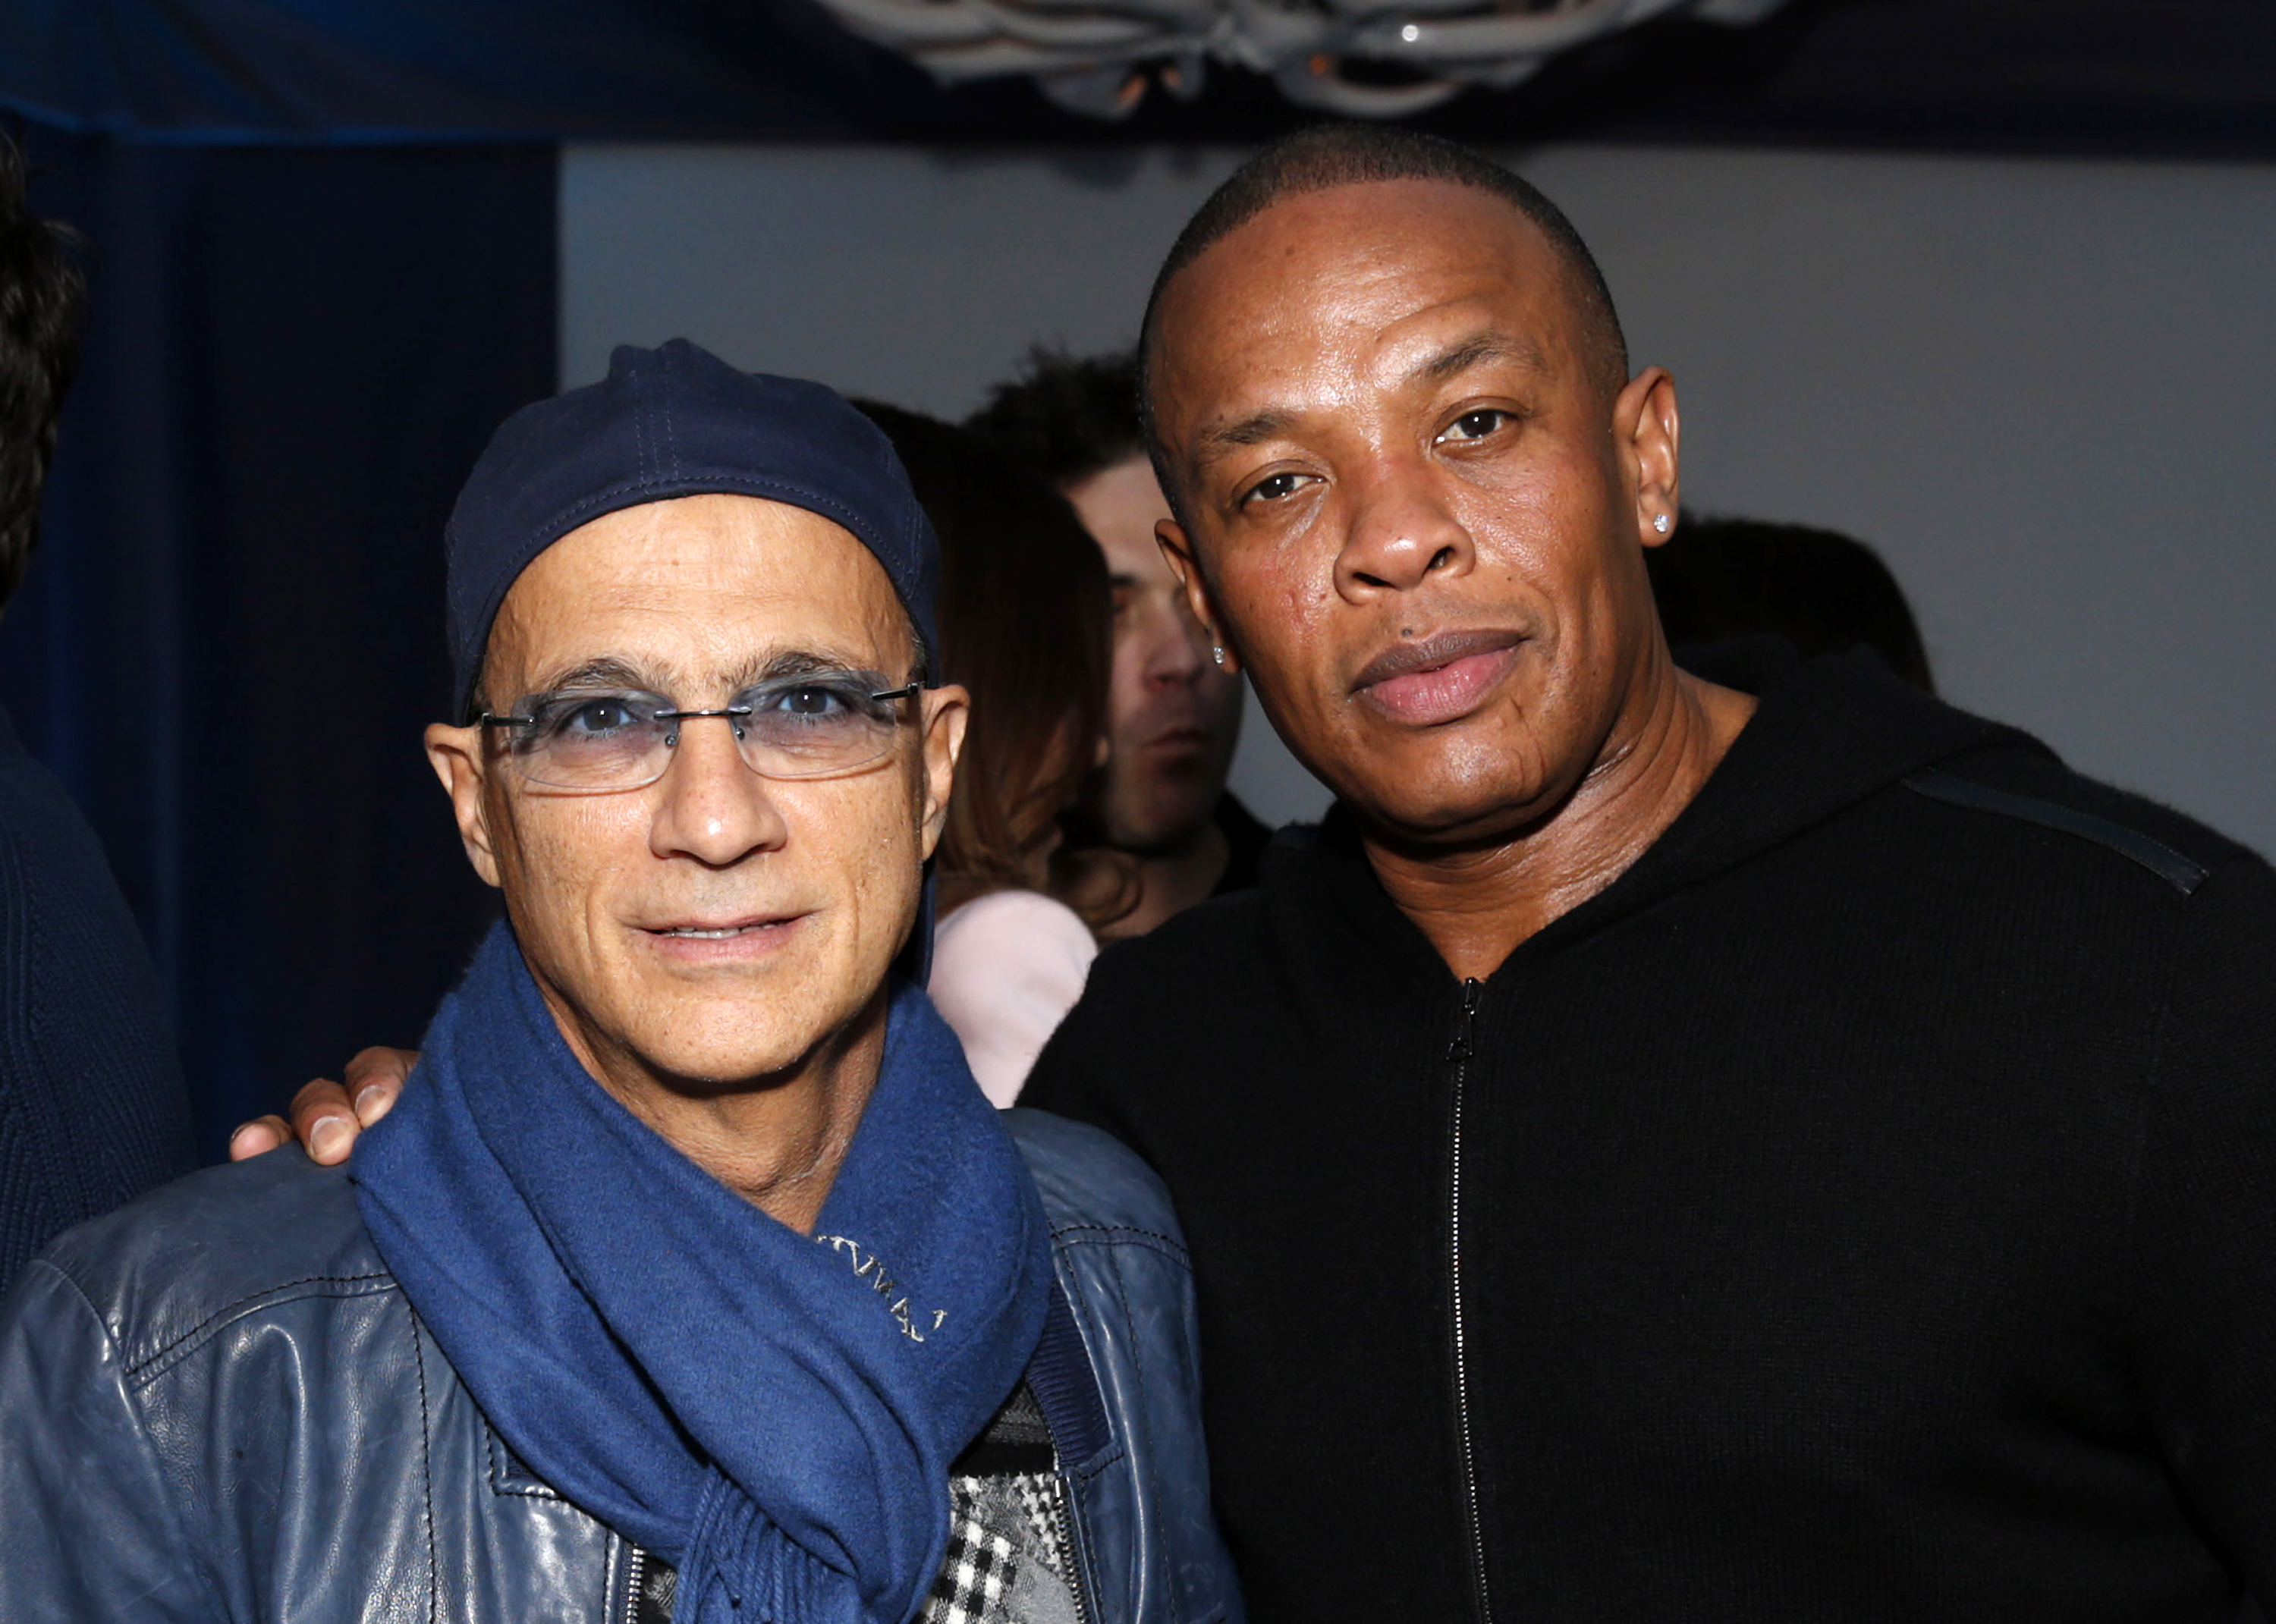 Music industry entrepreneur Jimmy Iovine, left, and hip-hop mogul Dr. Dre at a Grammy Party in Los Angeles on Feb. 10, 2013. (Todd Williamson—Invision/AP)